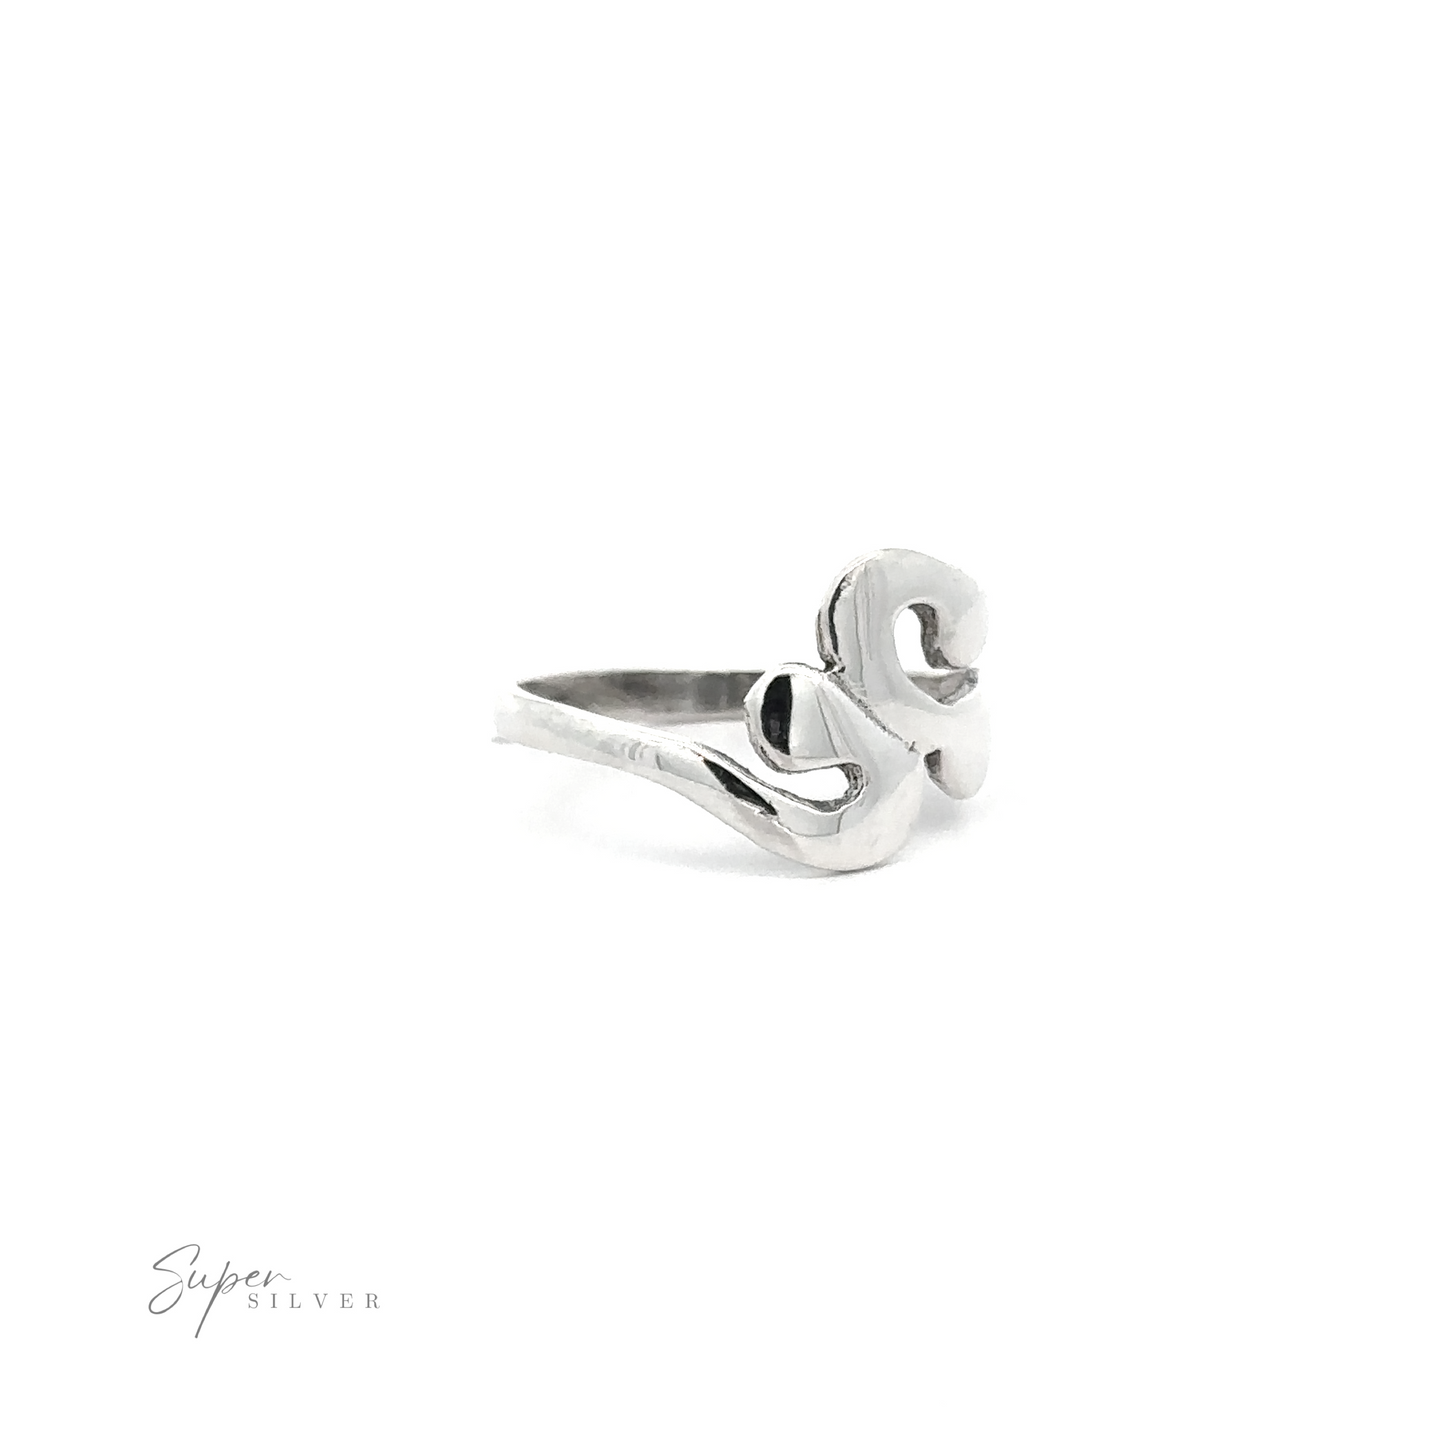 A uniquely designed [Wavy Swirl Ring] with a funky heart motif.